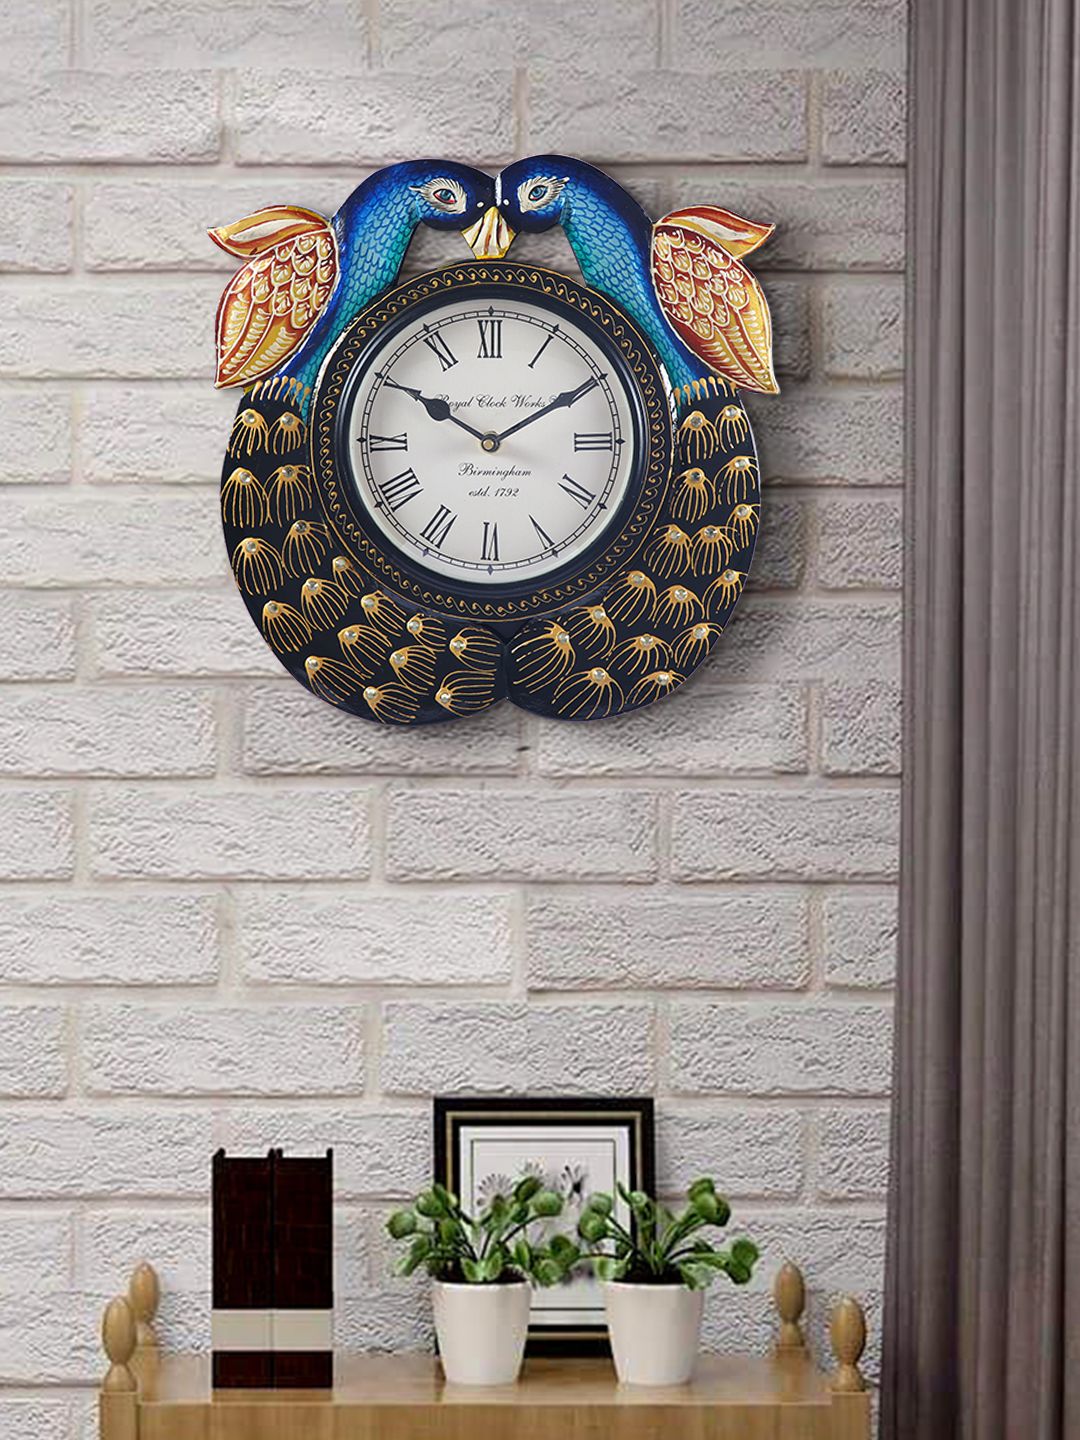 Aapno Rajasthan Blue & Black Textured Animal Shaped Traditional Analogue Wall Clock 29 cm Price in India